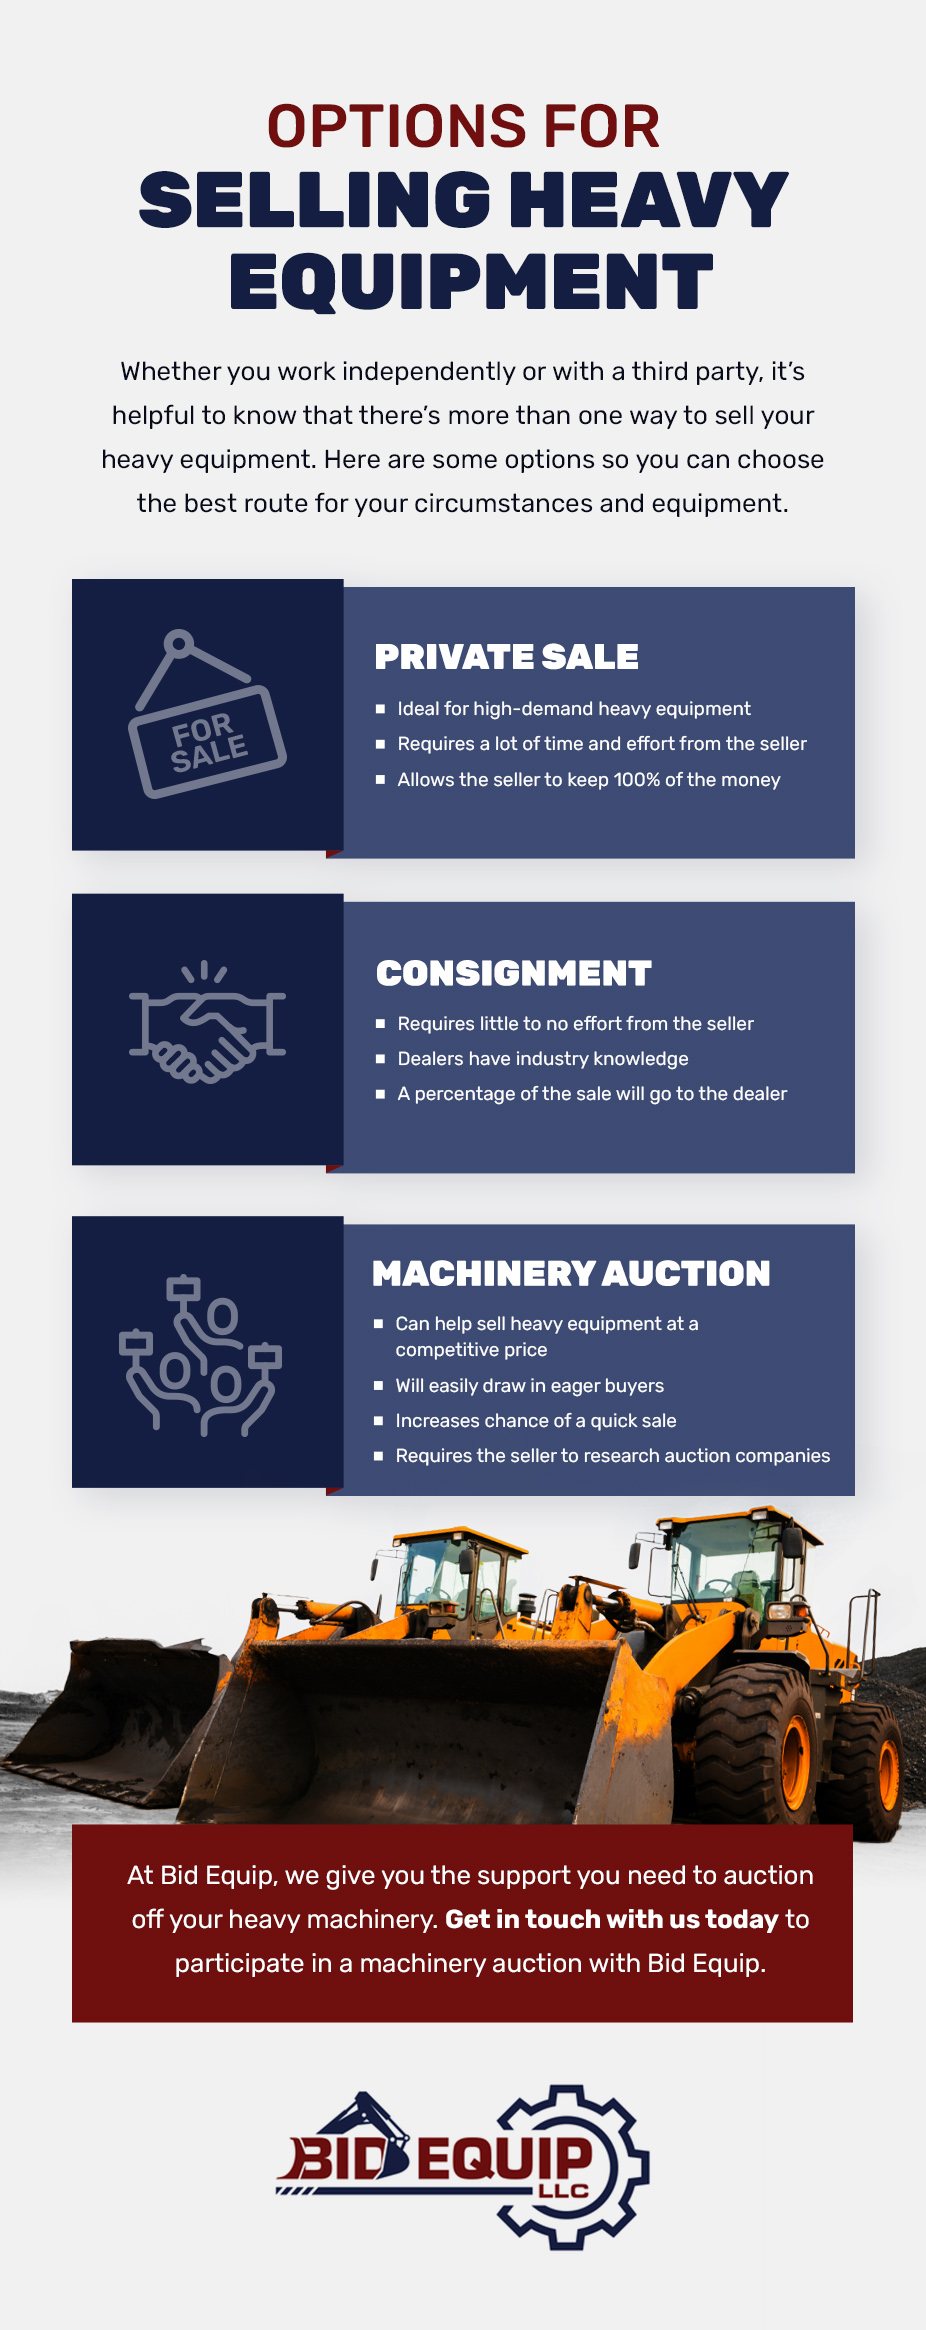 Bid Equip options for selling used equipment 